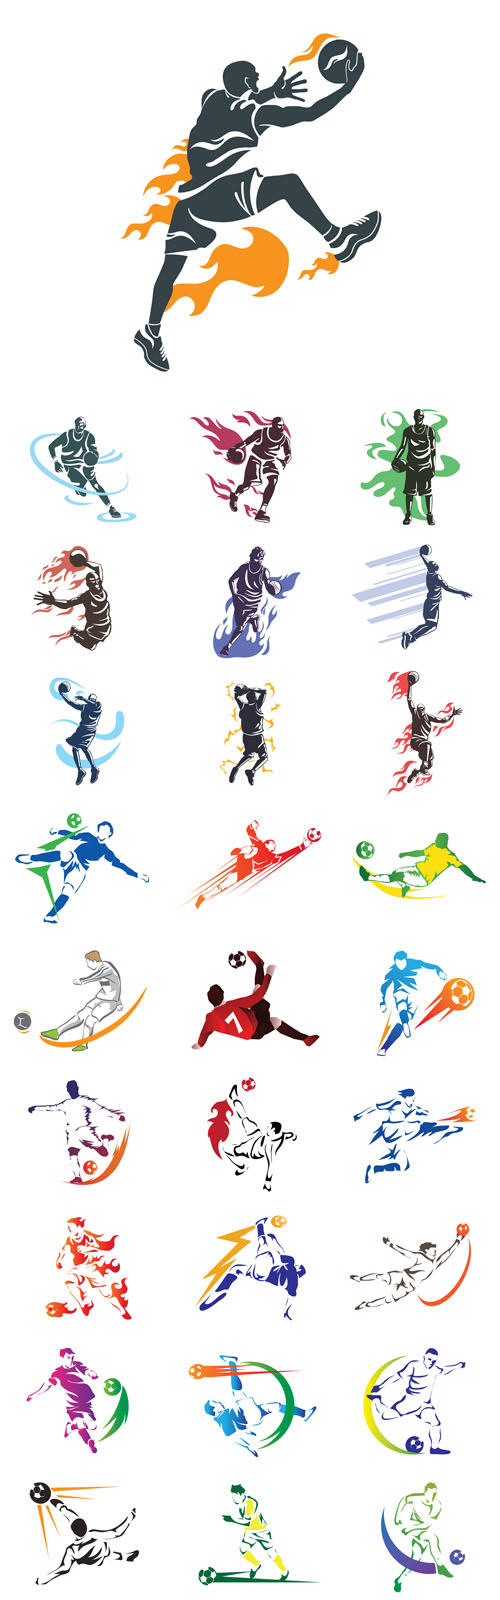 Vectors - Modern Professional Basketball and Soccer Player